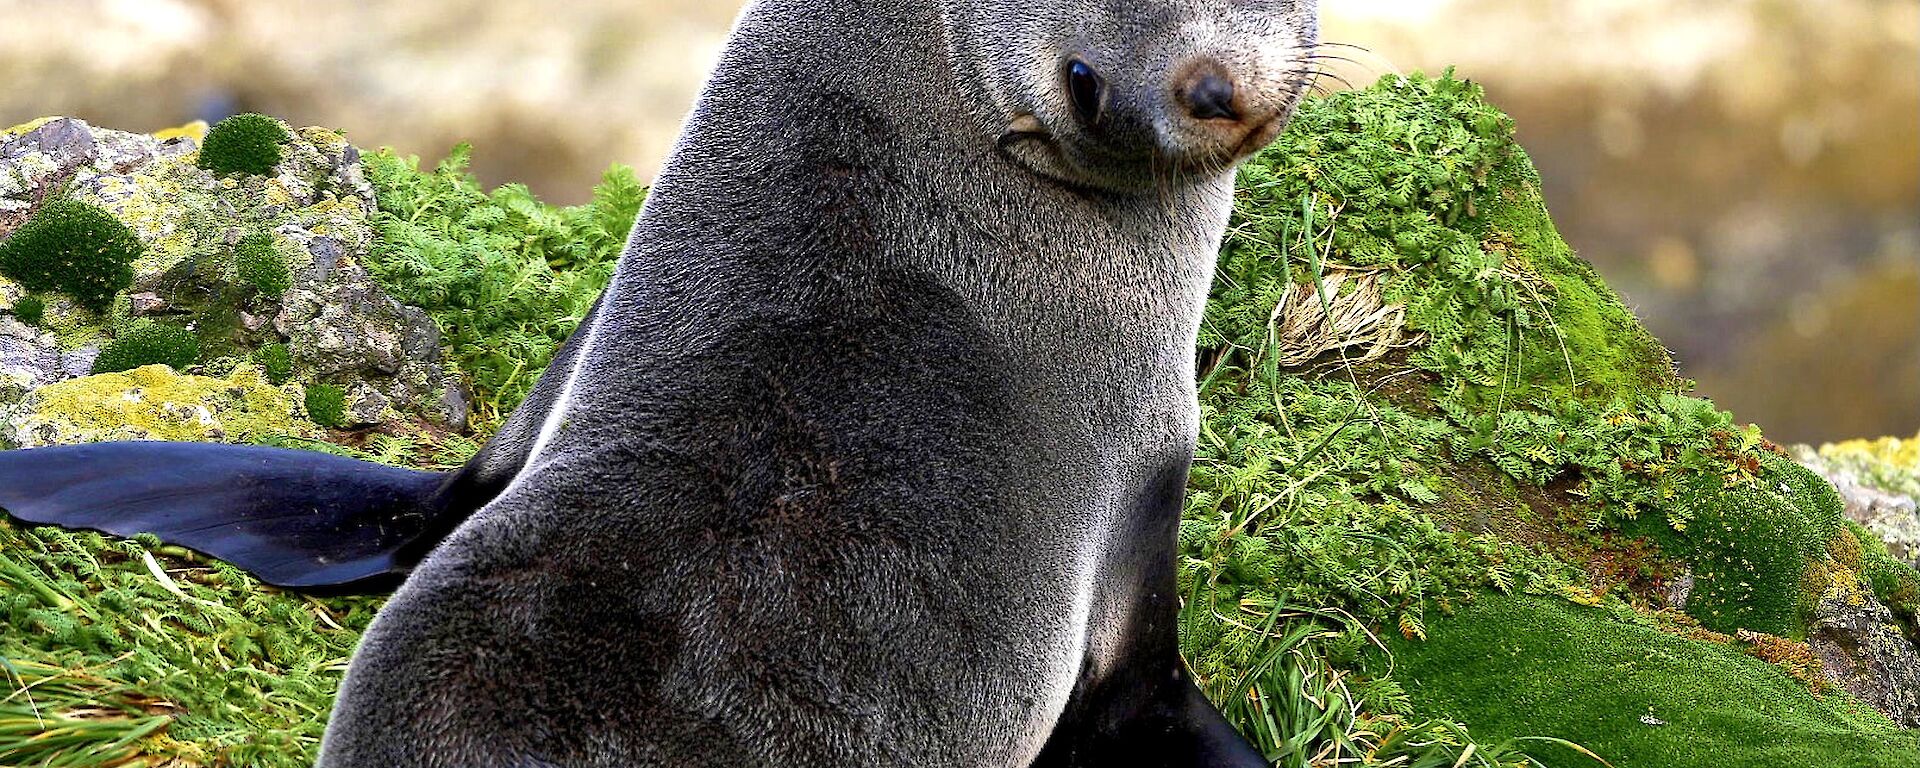 A fur seal sitting on a tussock looking back over its shoulder to the camera